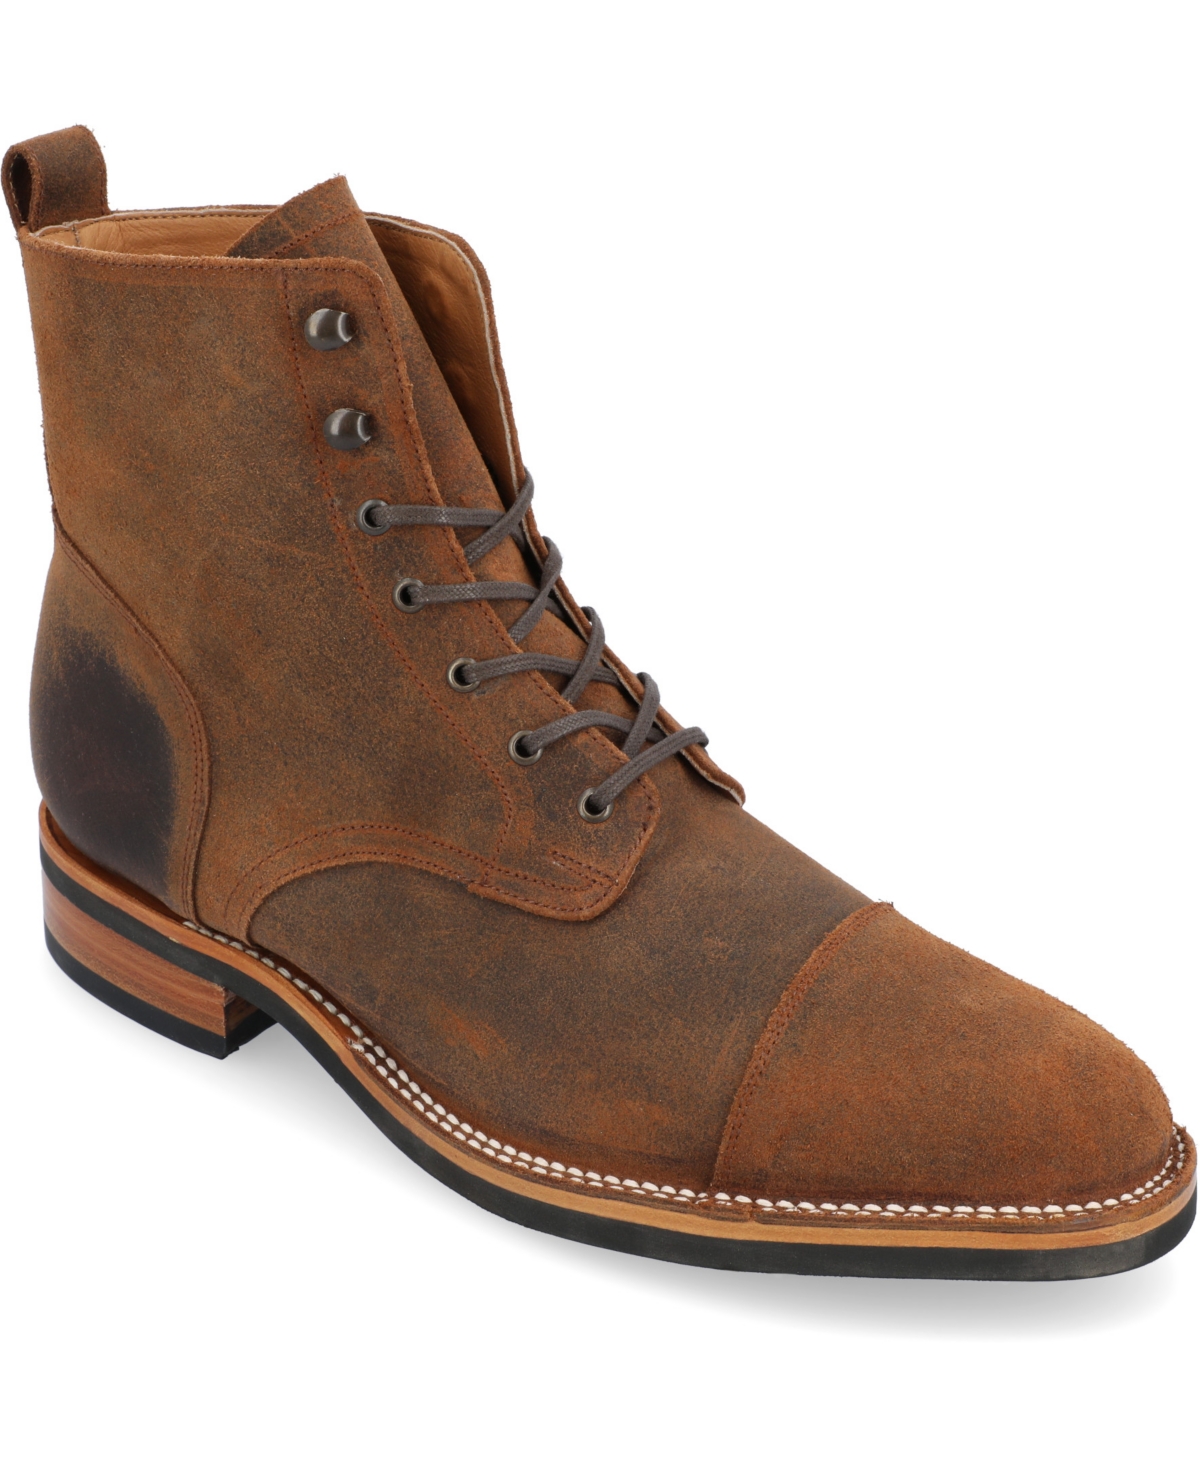 Men's Legacy Lace-up Rugged Stitchdown Captoe Boot - Rust